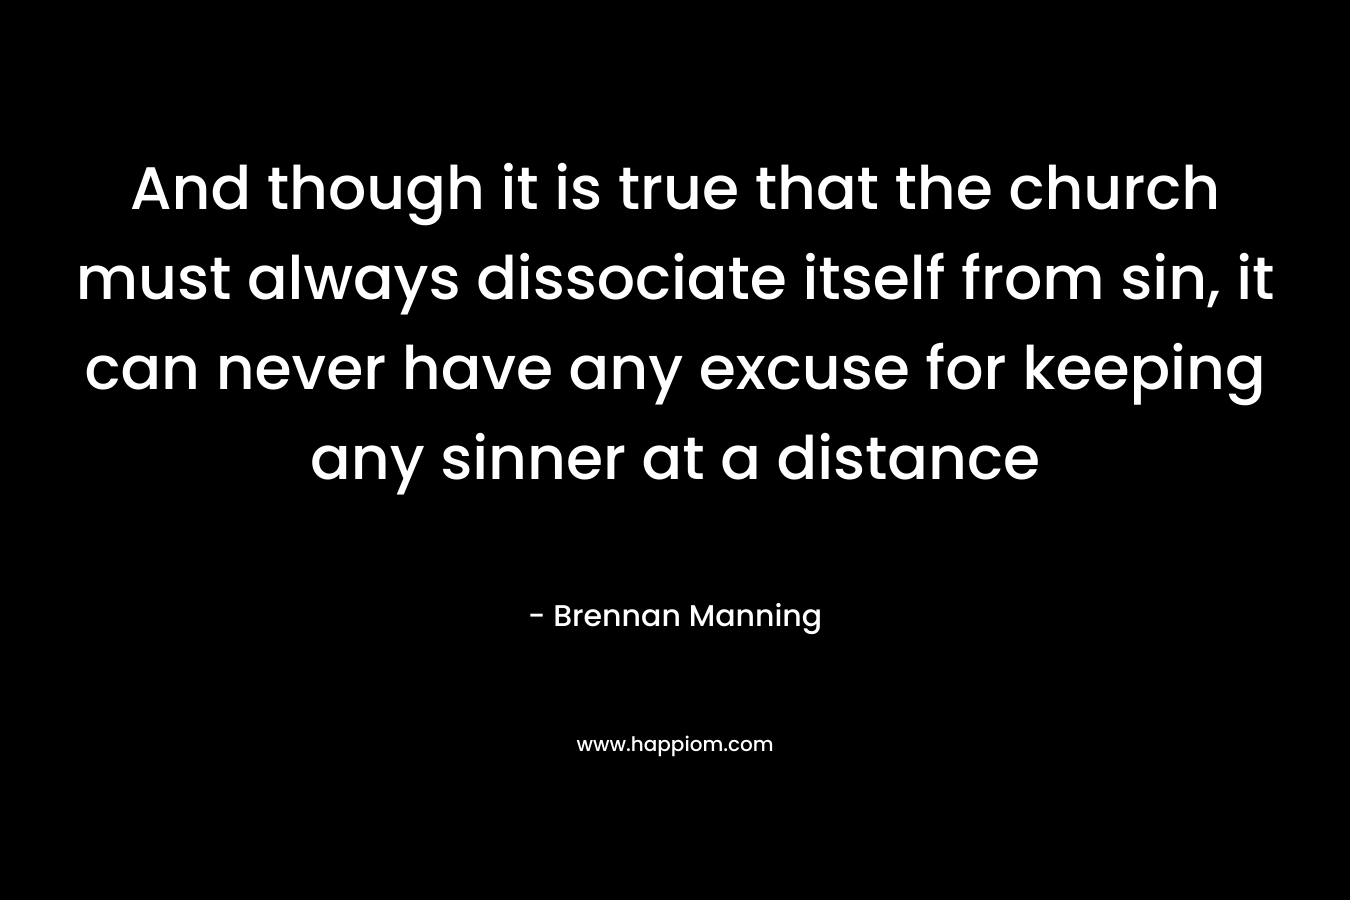 And though it is true that the church must always dissociate itself from sin, it can never have any excuse for keeping any sinner at a distance – Brennan Manning